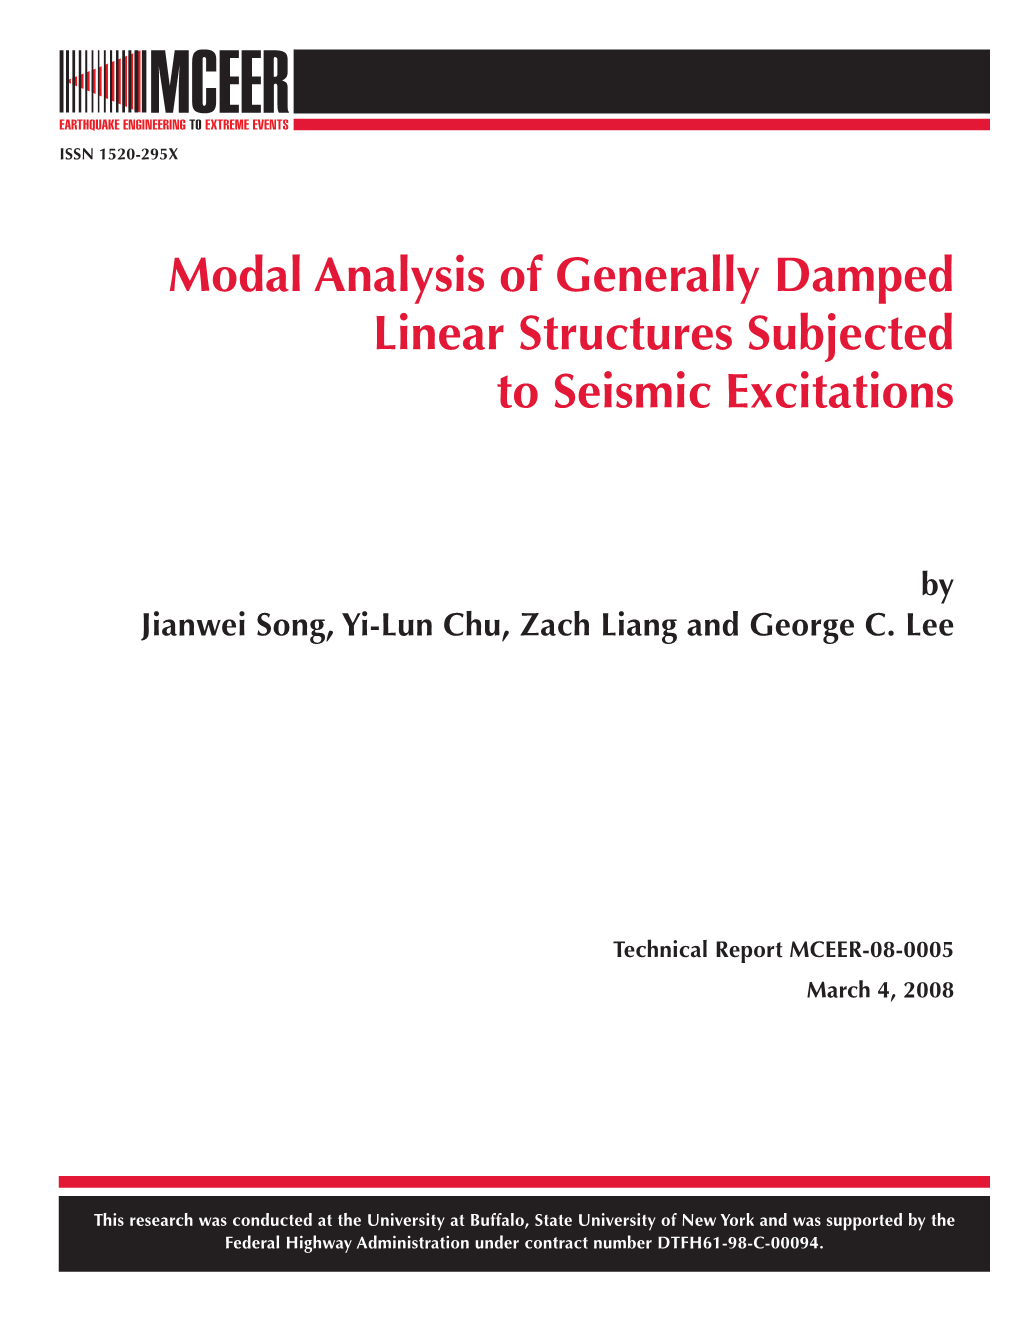 Modal Analysis of Generally Damped Linear Structures Subjected to Seismic Excitations